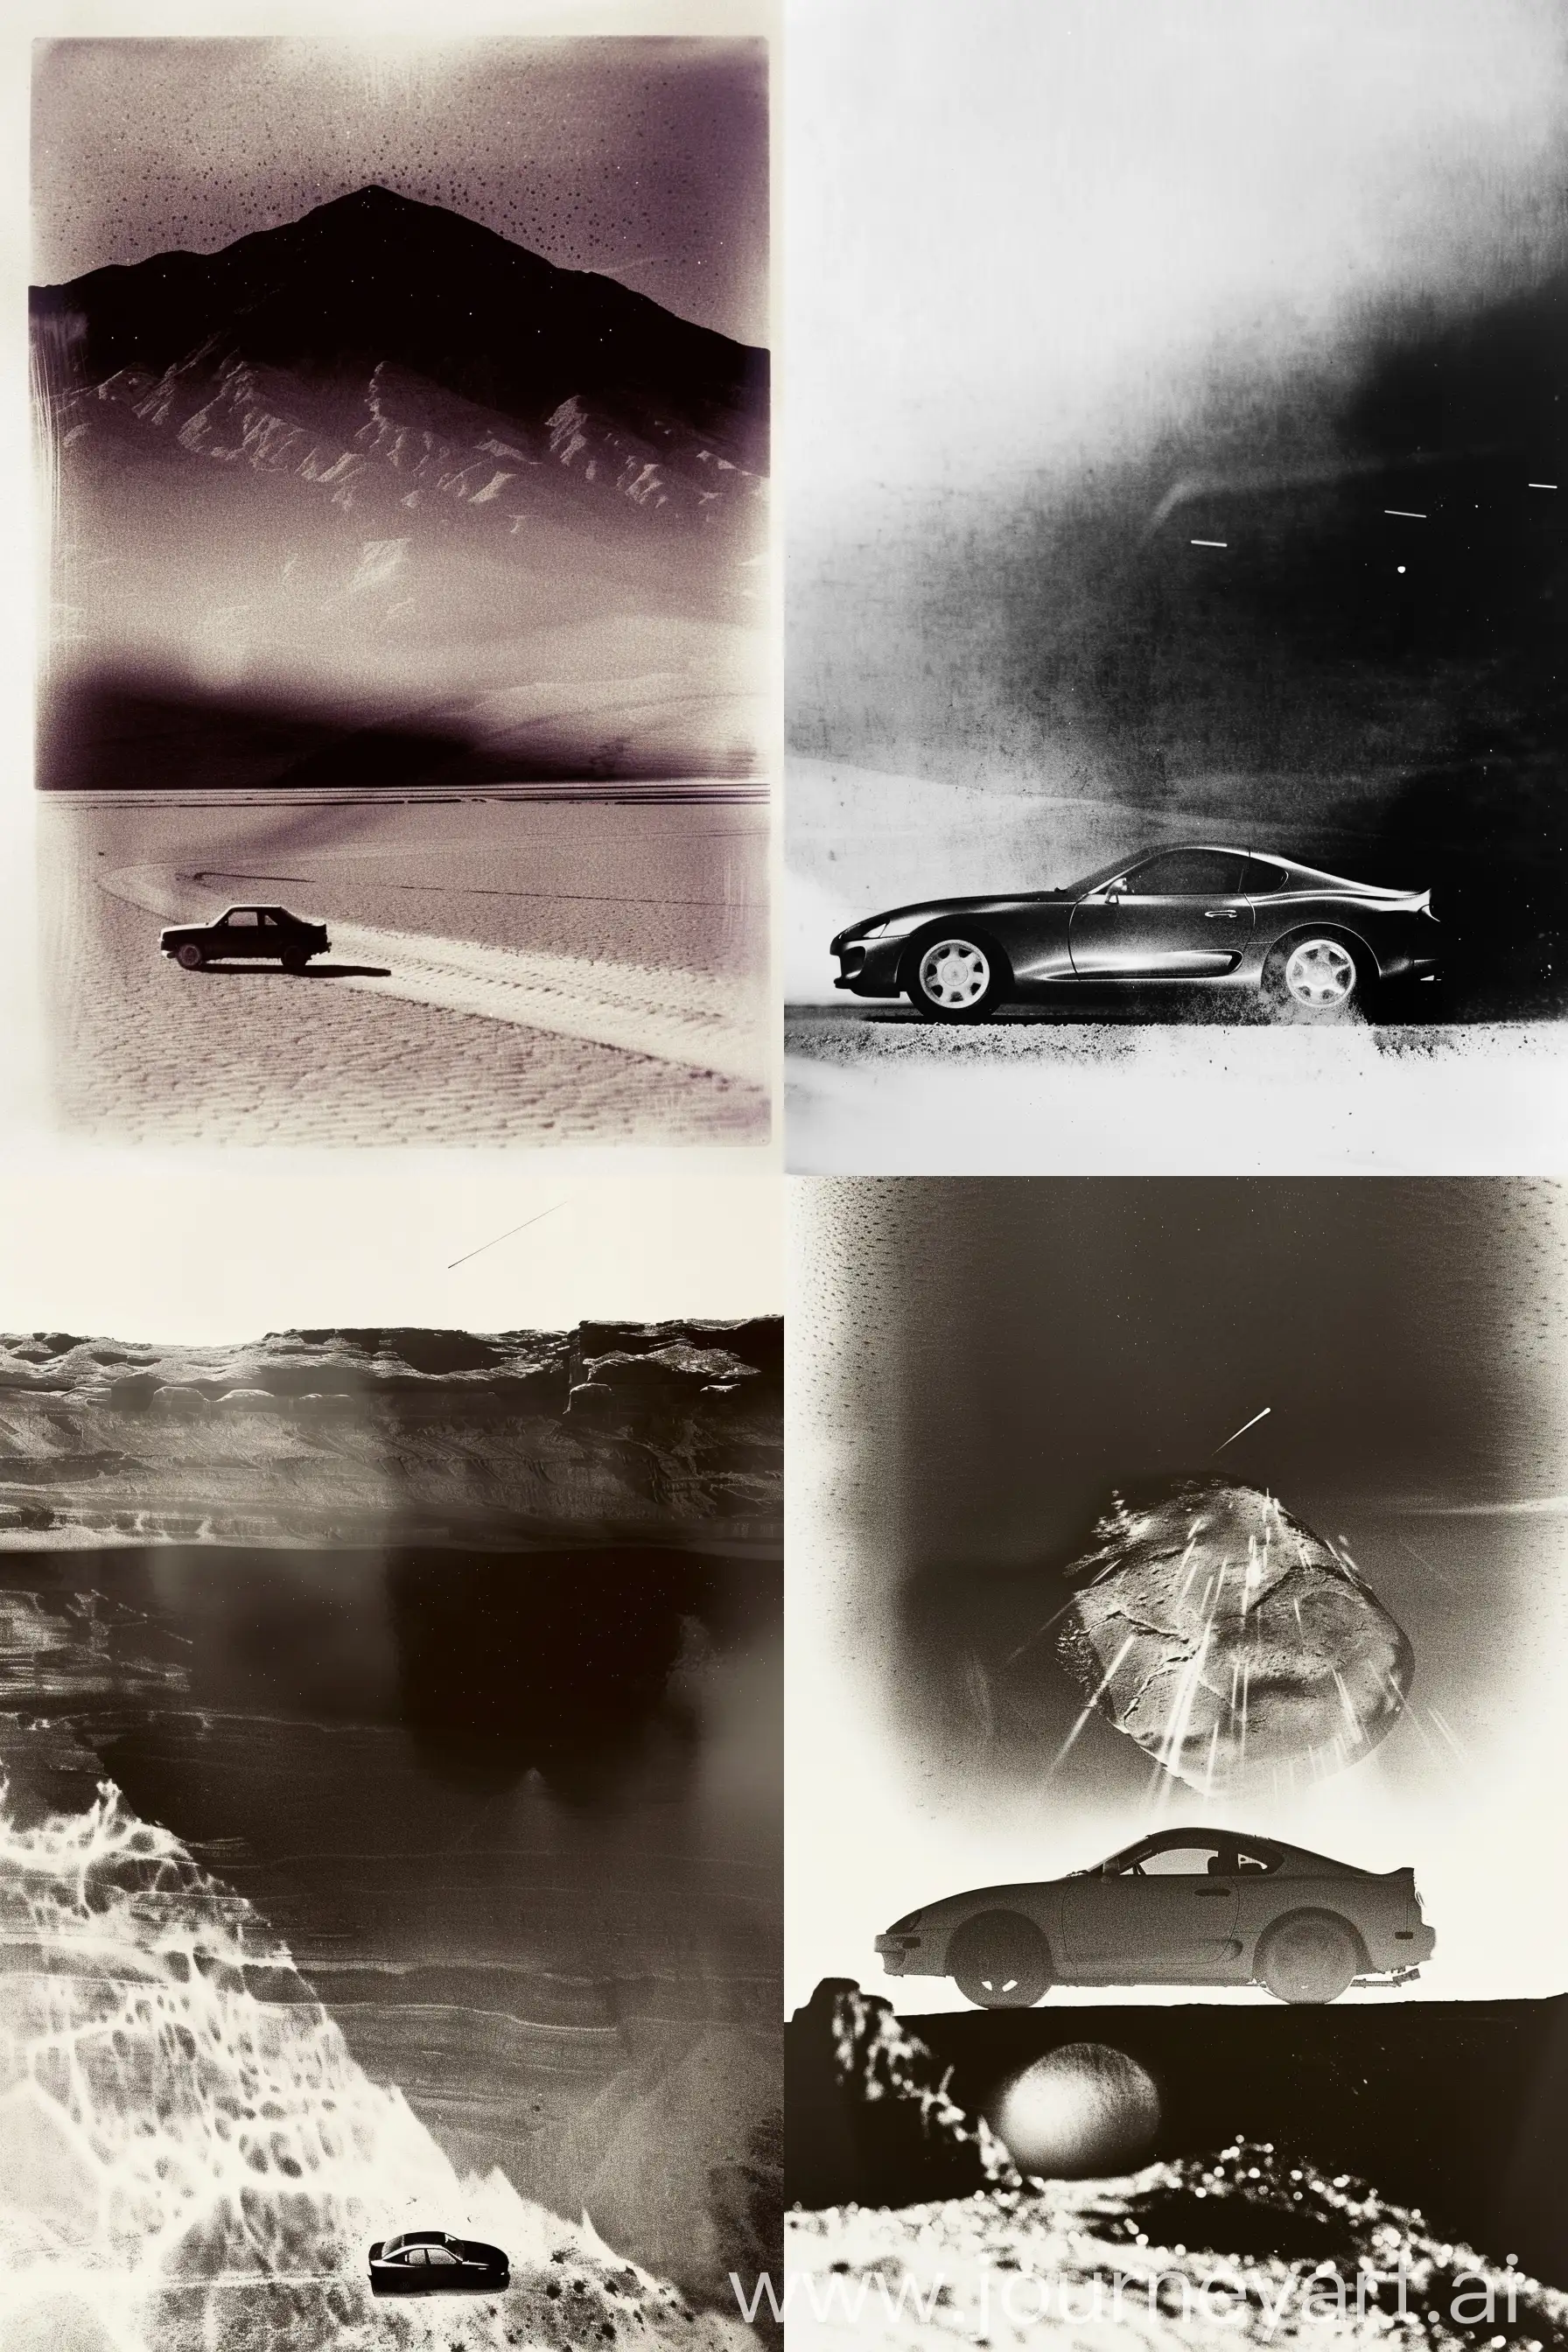 A very distant shot of a Supra planted in the desert in a purple-grayish color, Monochrome, And in front of the car there is a very giant terrifying cave and inside it is black opaque, the background is black, Soft, like a dream, delusion, foggy, a sense of calm and terror, unsaturated, Unreal, meteors fall very very far away --ar 2:3 --s 0 --v 6 --p 31dy1jl --sref 1954435653